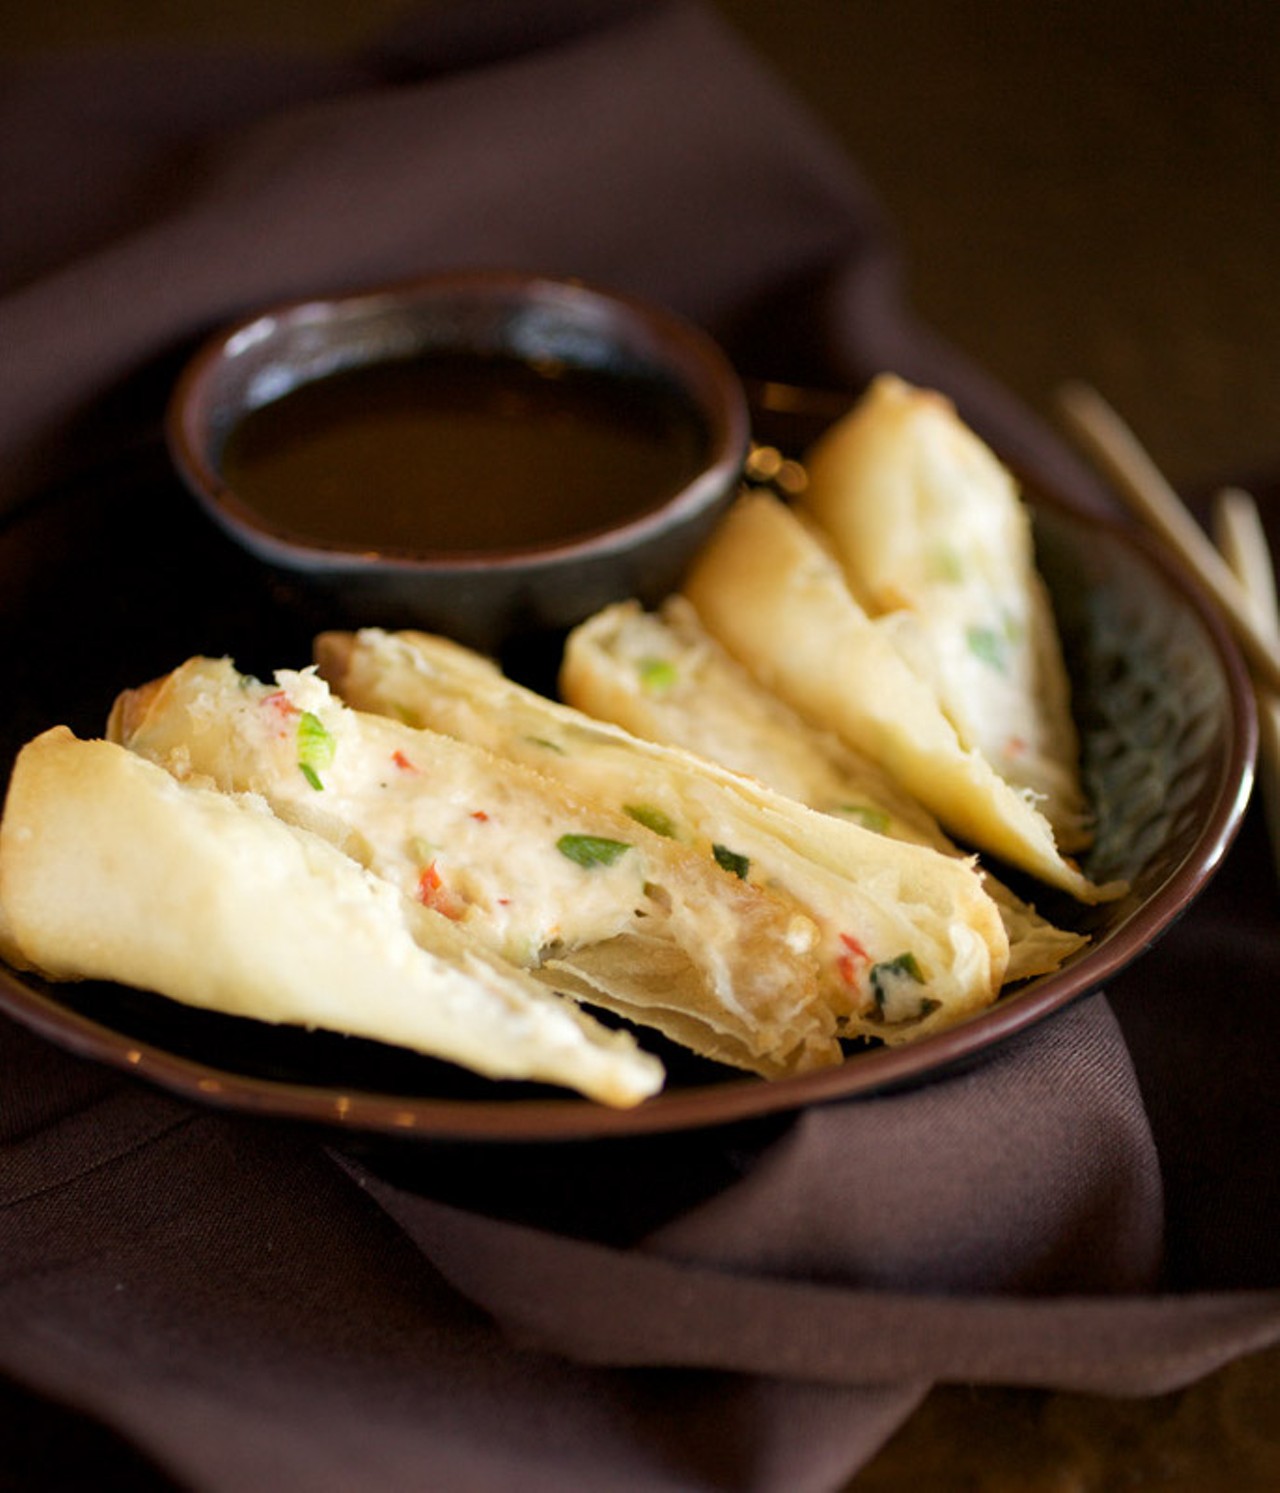 The house made, hand rolled, crab rangoon is made with real lump crab meant, bell peppers, scallions and ginger. It is served with their house made soy mustard sauce.